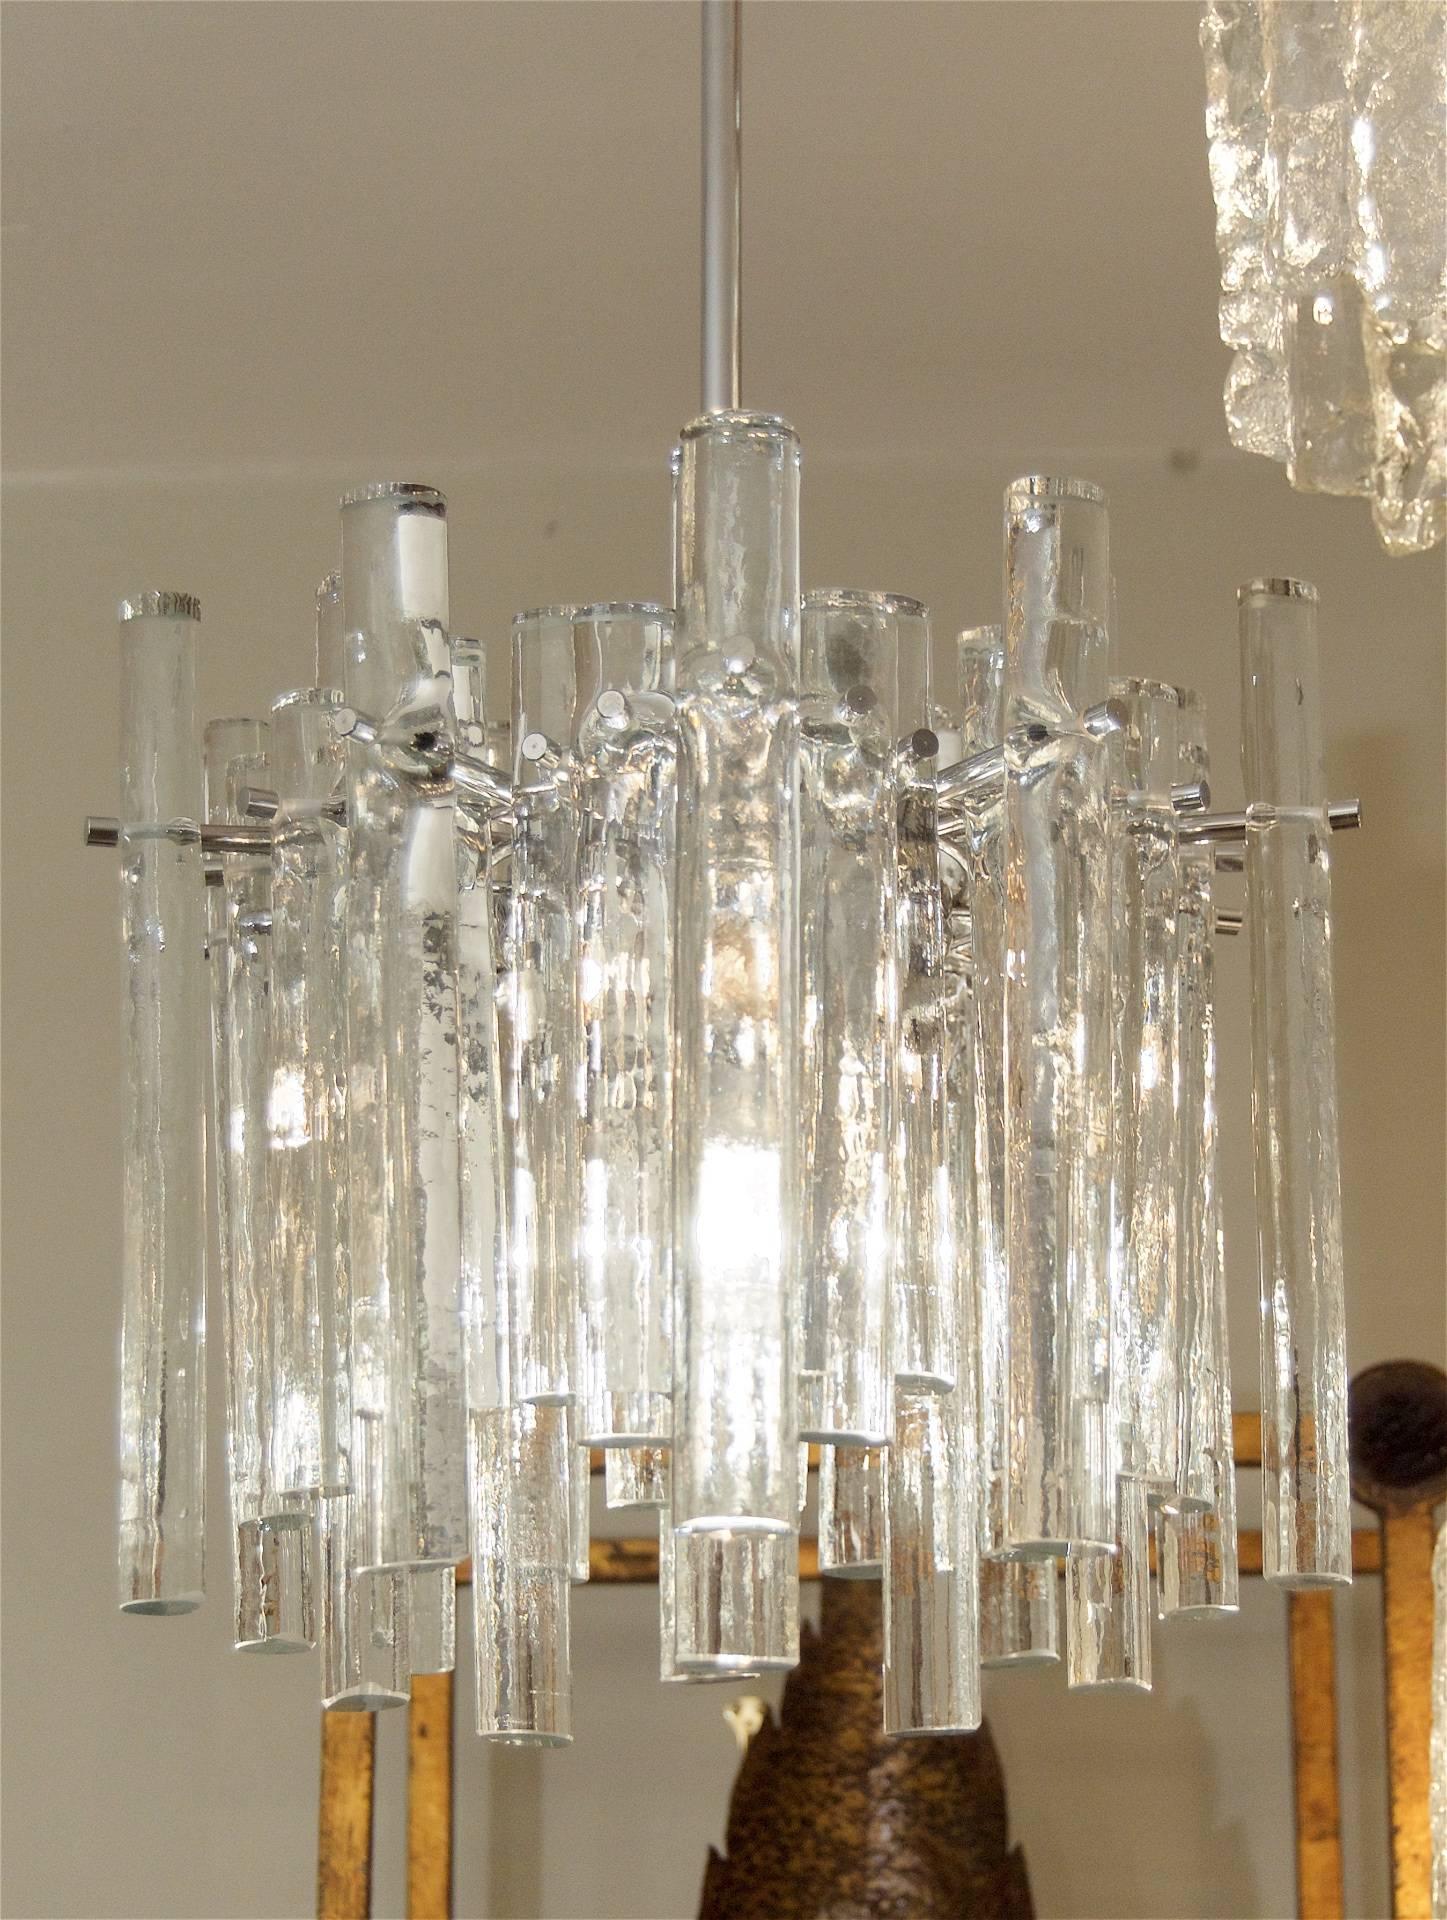 This elegant ice crystal fixture by Kinkeldey will complement all decors. 

Three E-14 base bulbs radiate from body, up to 40 watts per bulb, and one medium base downlight bulb, up to 60 watts. New wiring. 

Height is of light fixture only.